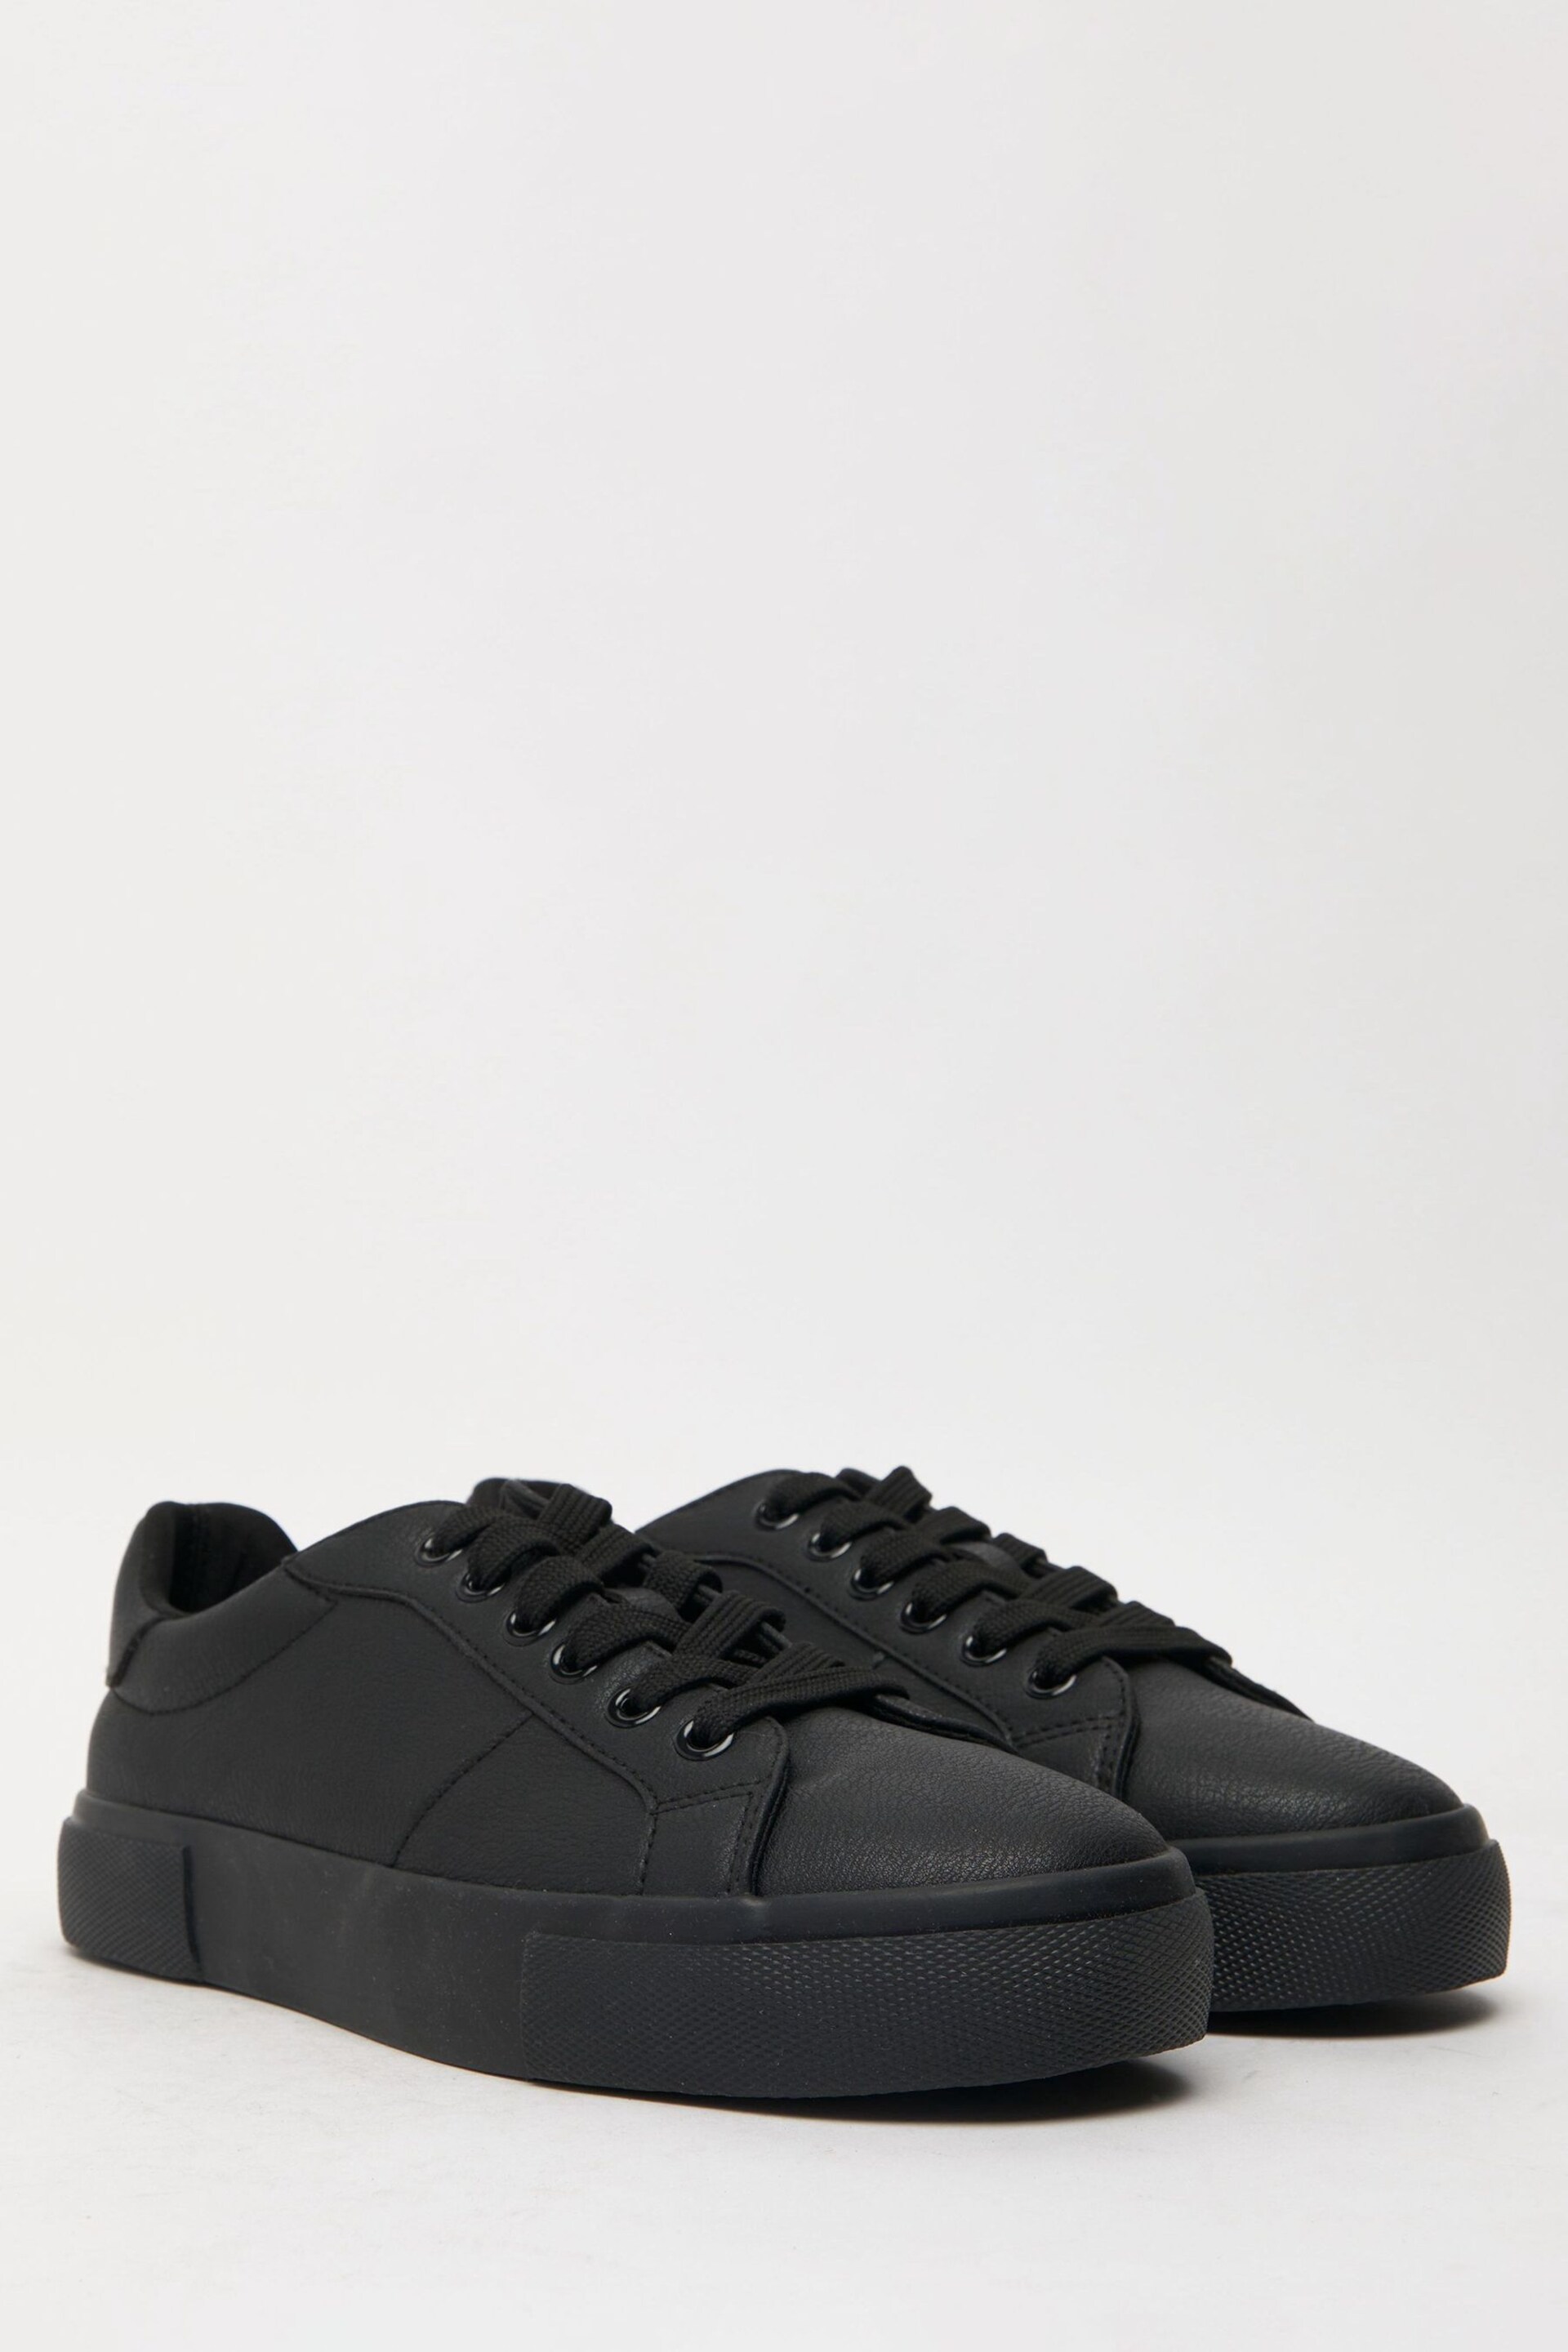 Schuh Nadine Lace Up Trainers - Image 2 of 4